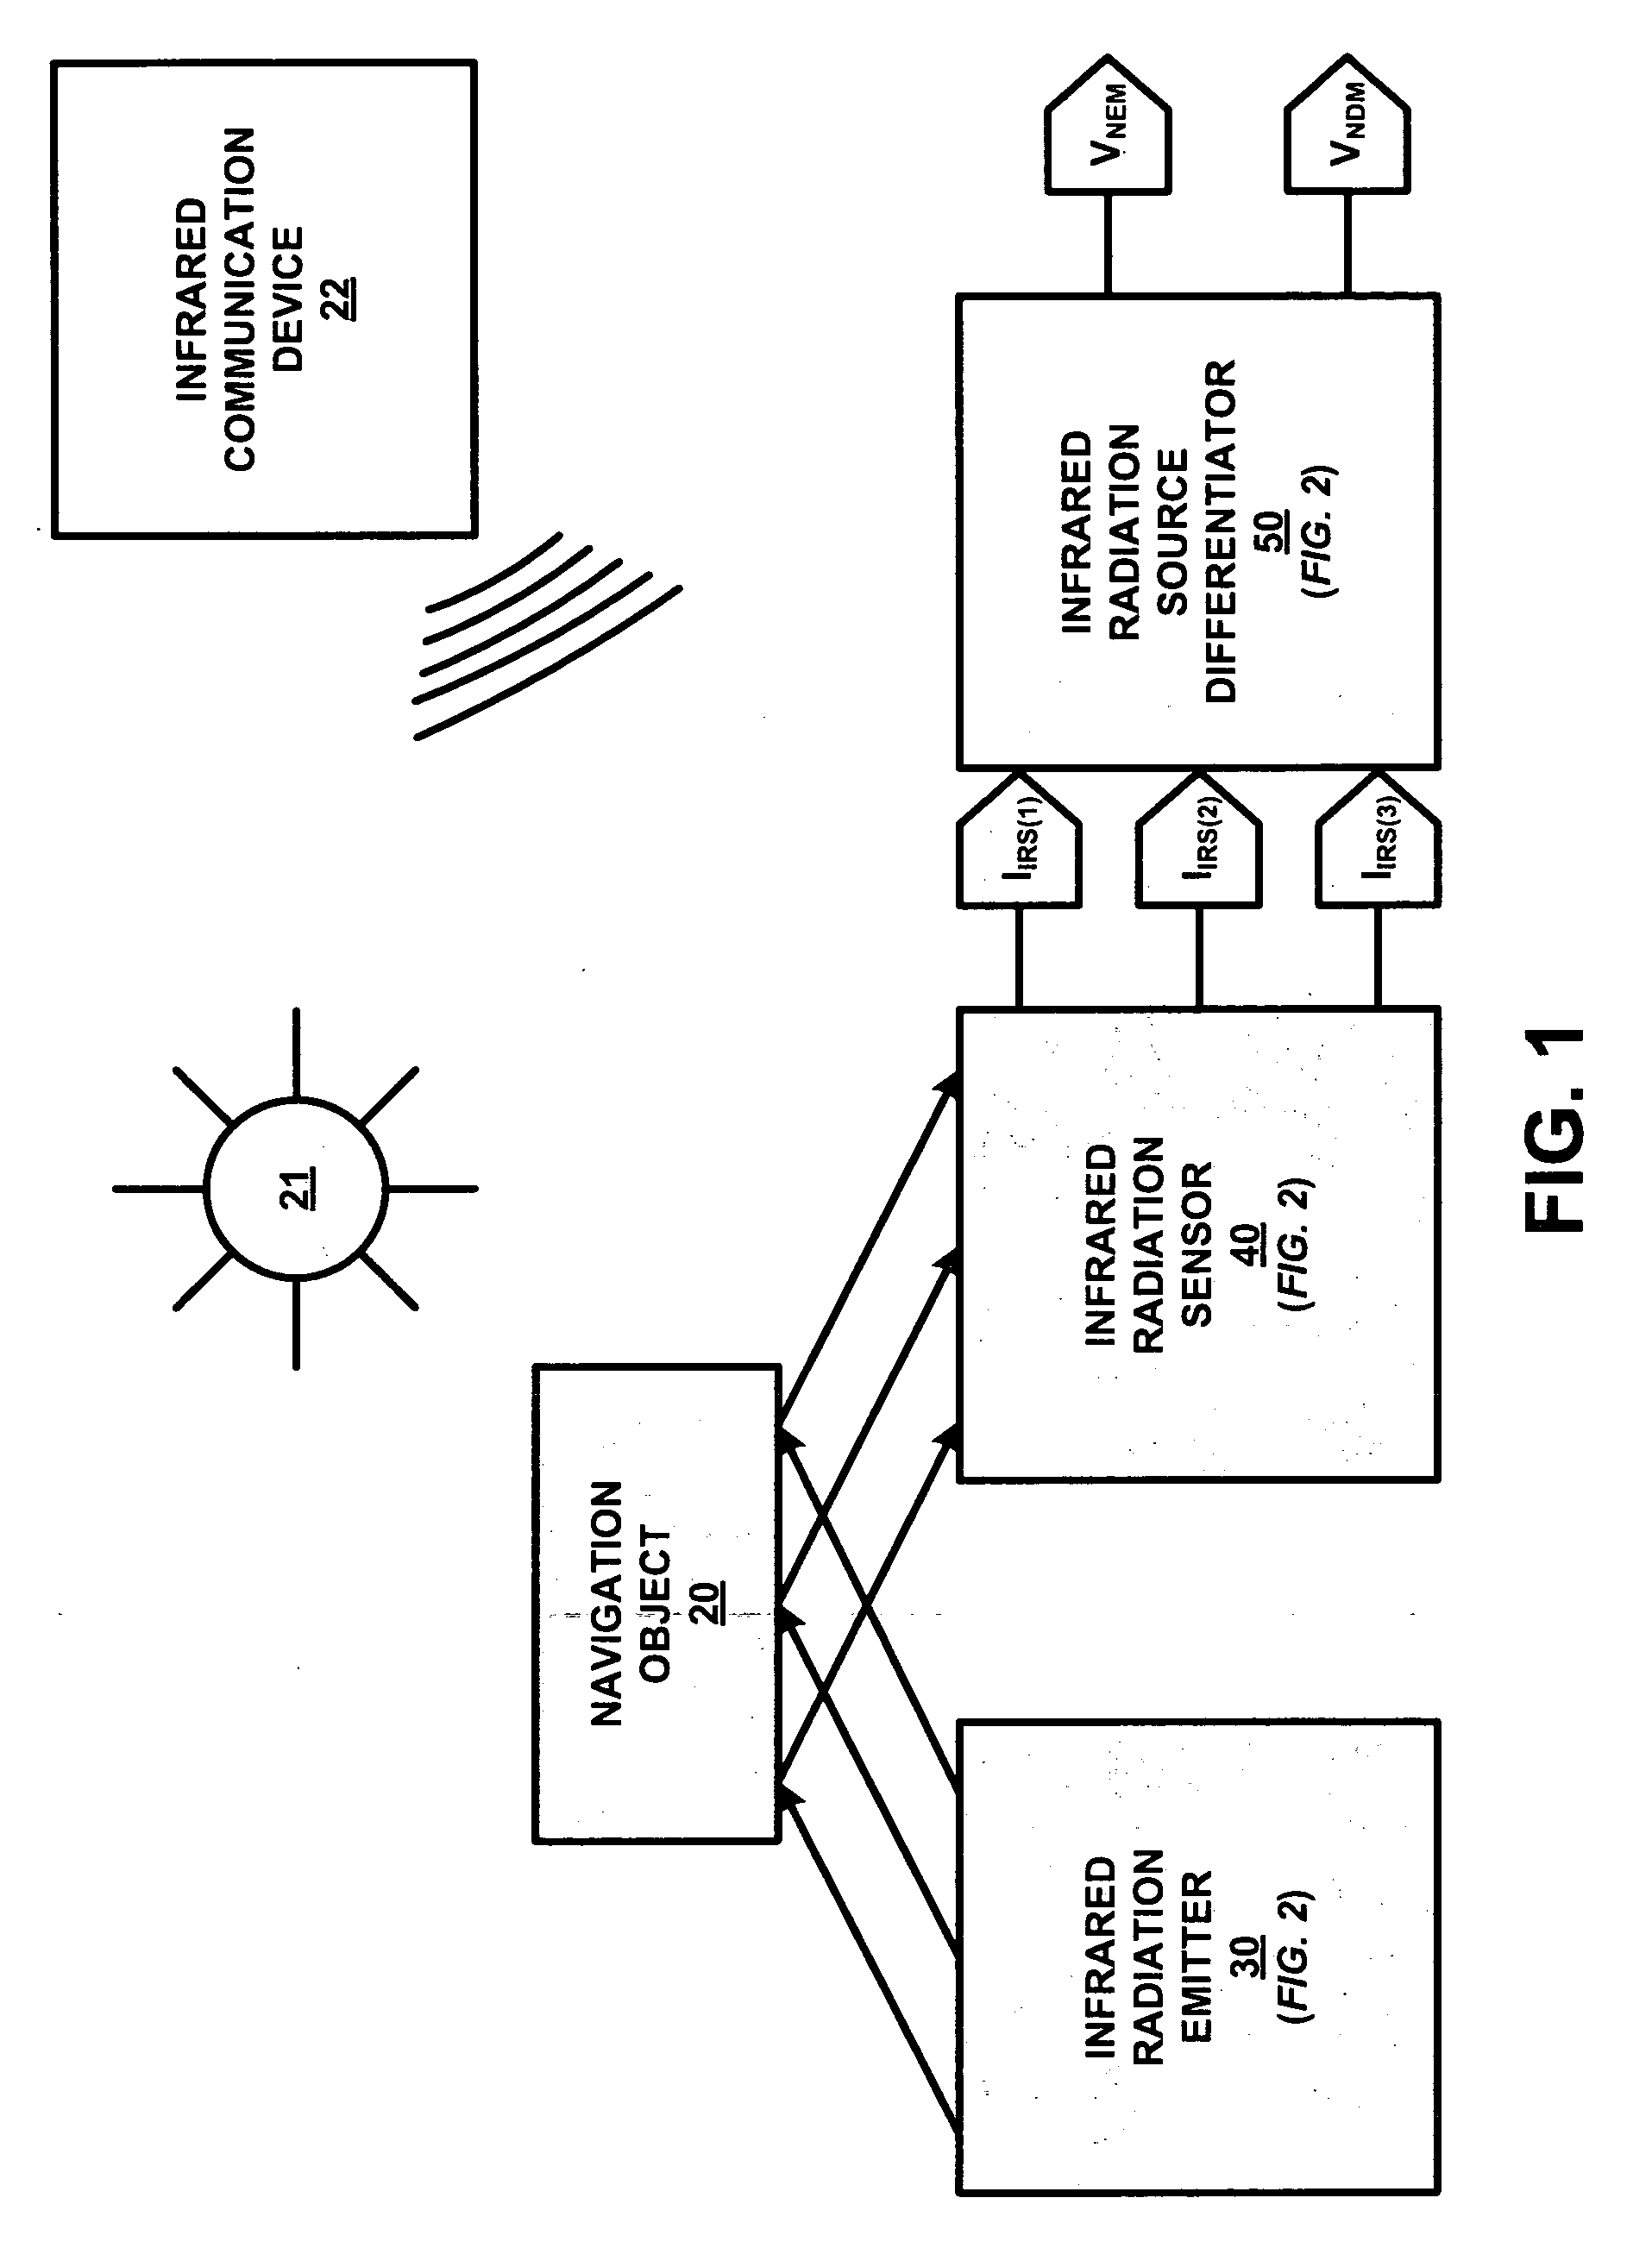 Proximity sensor for a graphical user interface navigation button